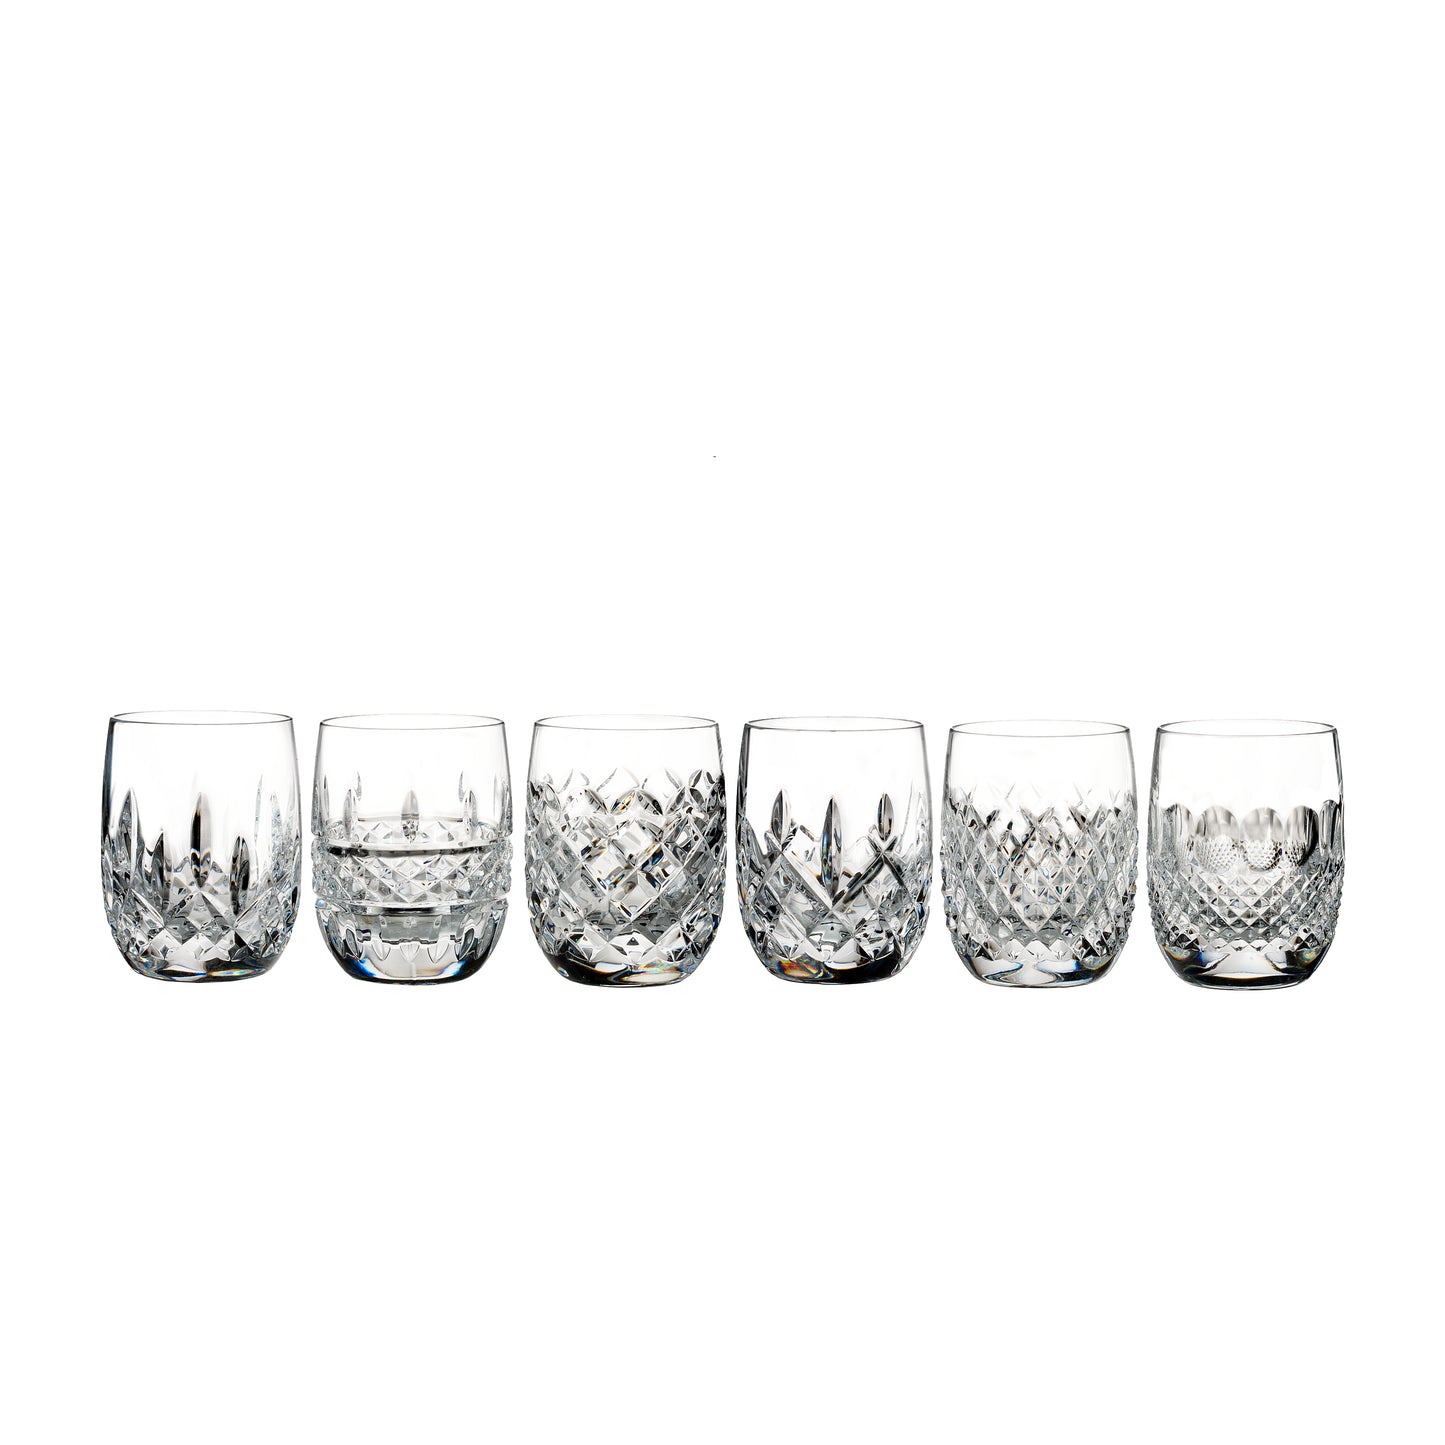 Waterford Lismore Connoisseur Heritage Rounded Tumbler, Set of 6